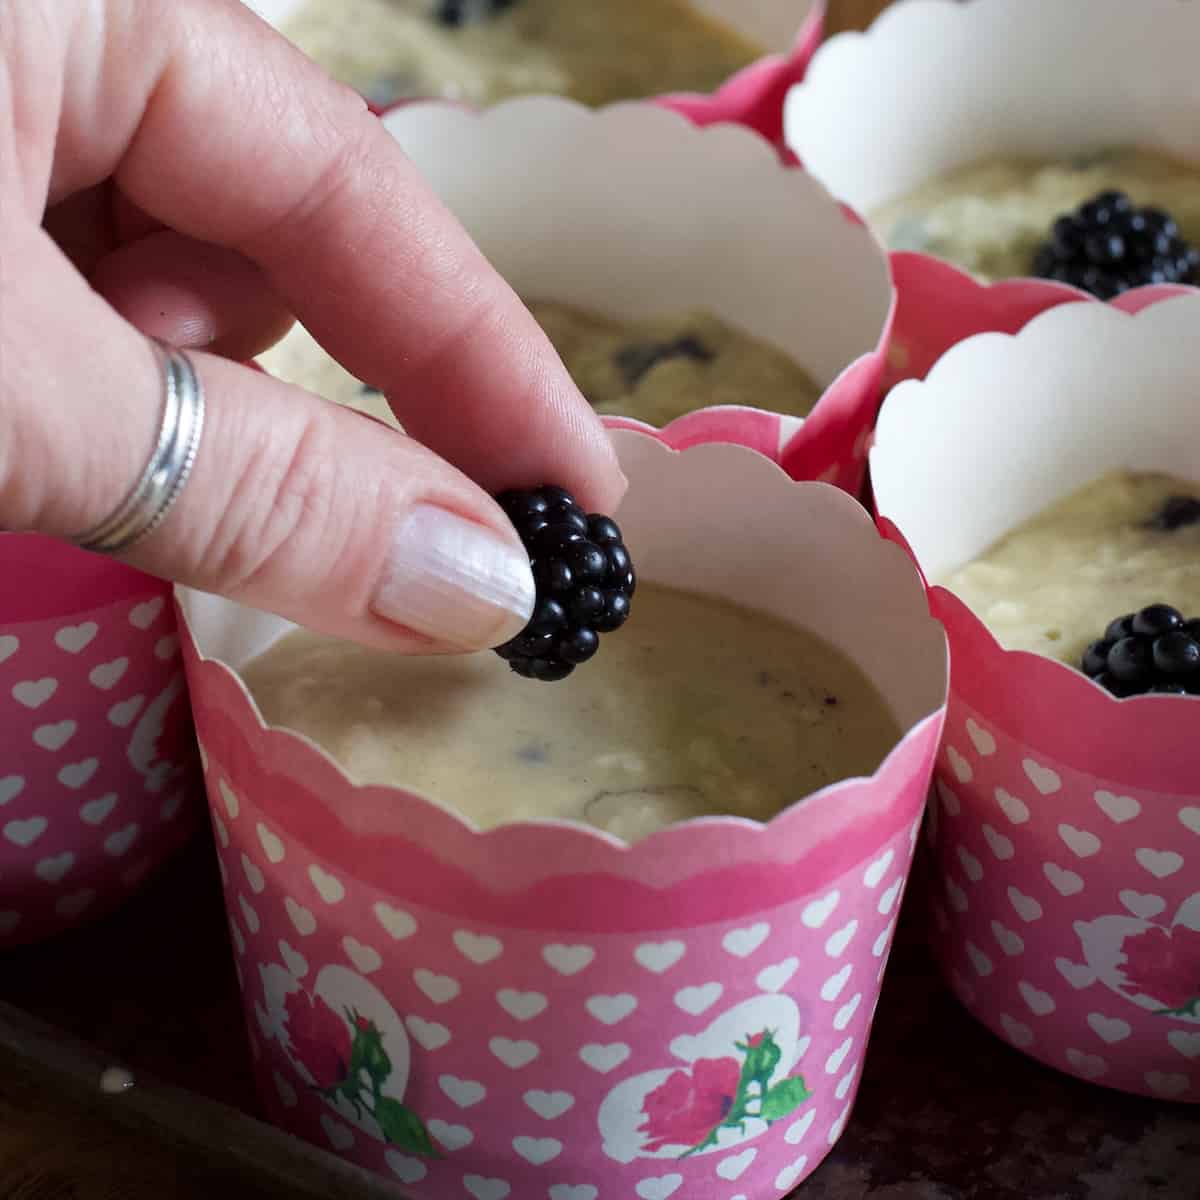 Woman placing a fresh blackberry on top of a muffin case filled with blackberry muffin batter